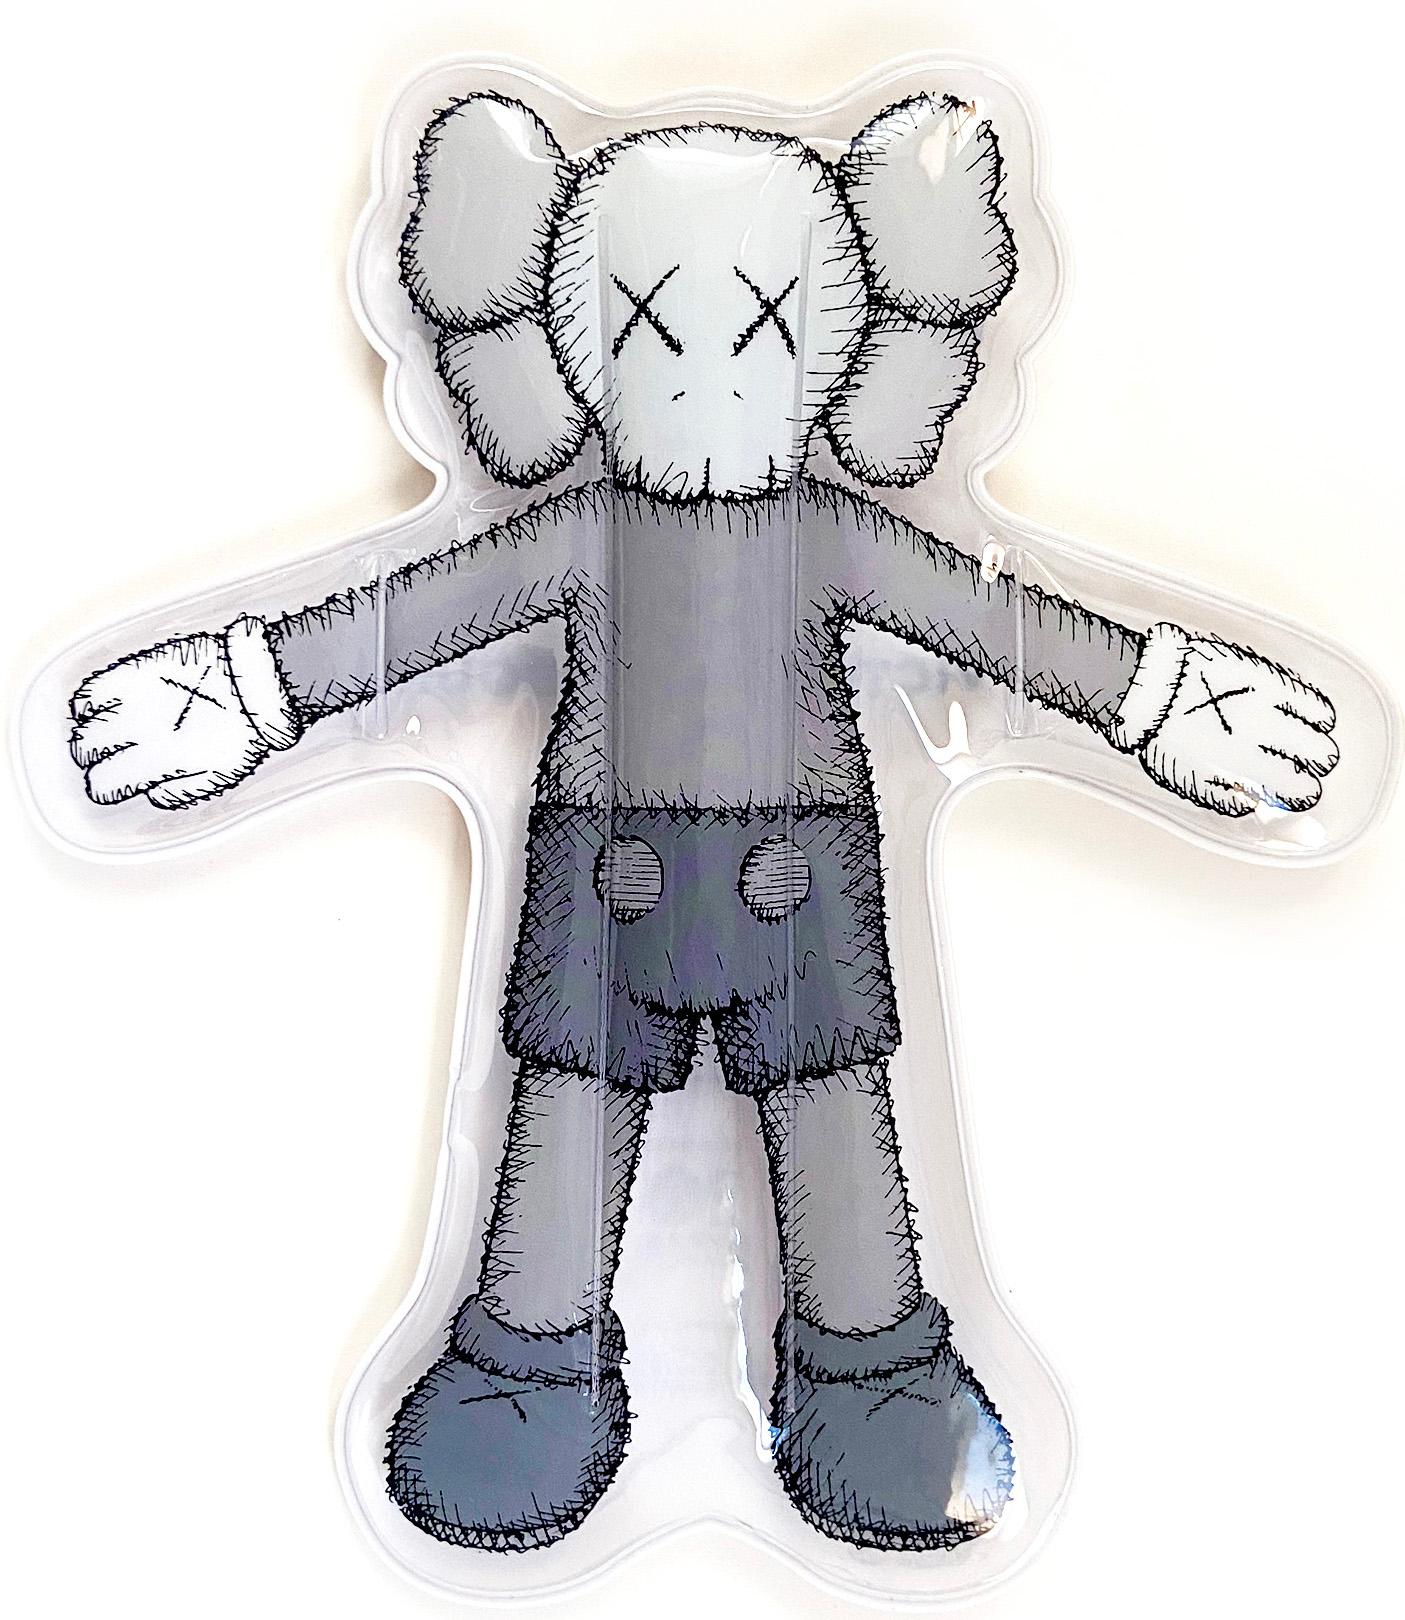 KAWS HOLIDAY: Hong Kong 2019 announcement:
Rare inflated promotional KAWS Holiday announcement published by All Rights Reserved to advertise the debut of a large scale KAWS floating figure in Hong Kong's Victoria Harbour in 2019.

Medium: Inflated